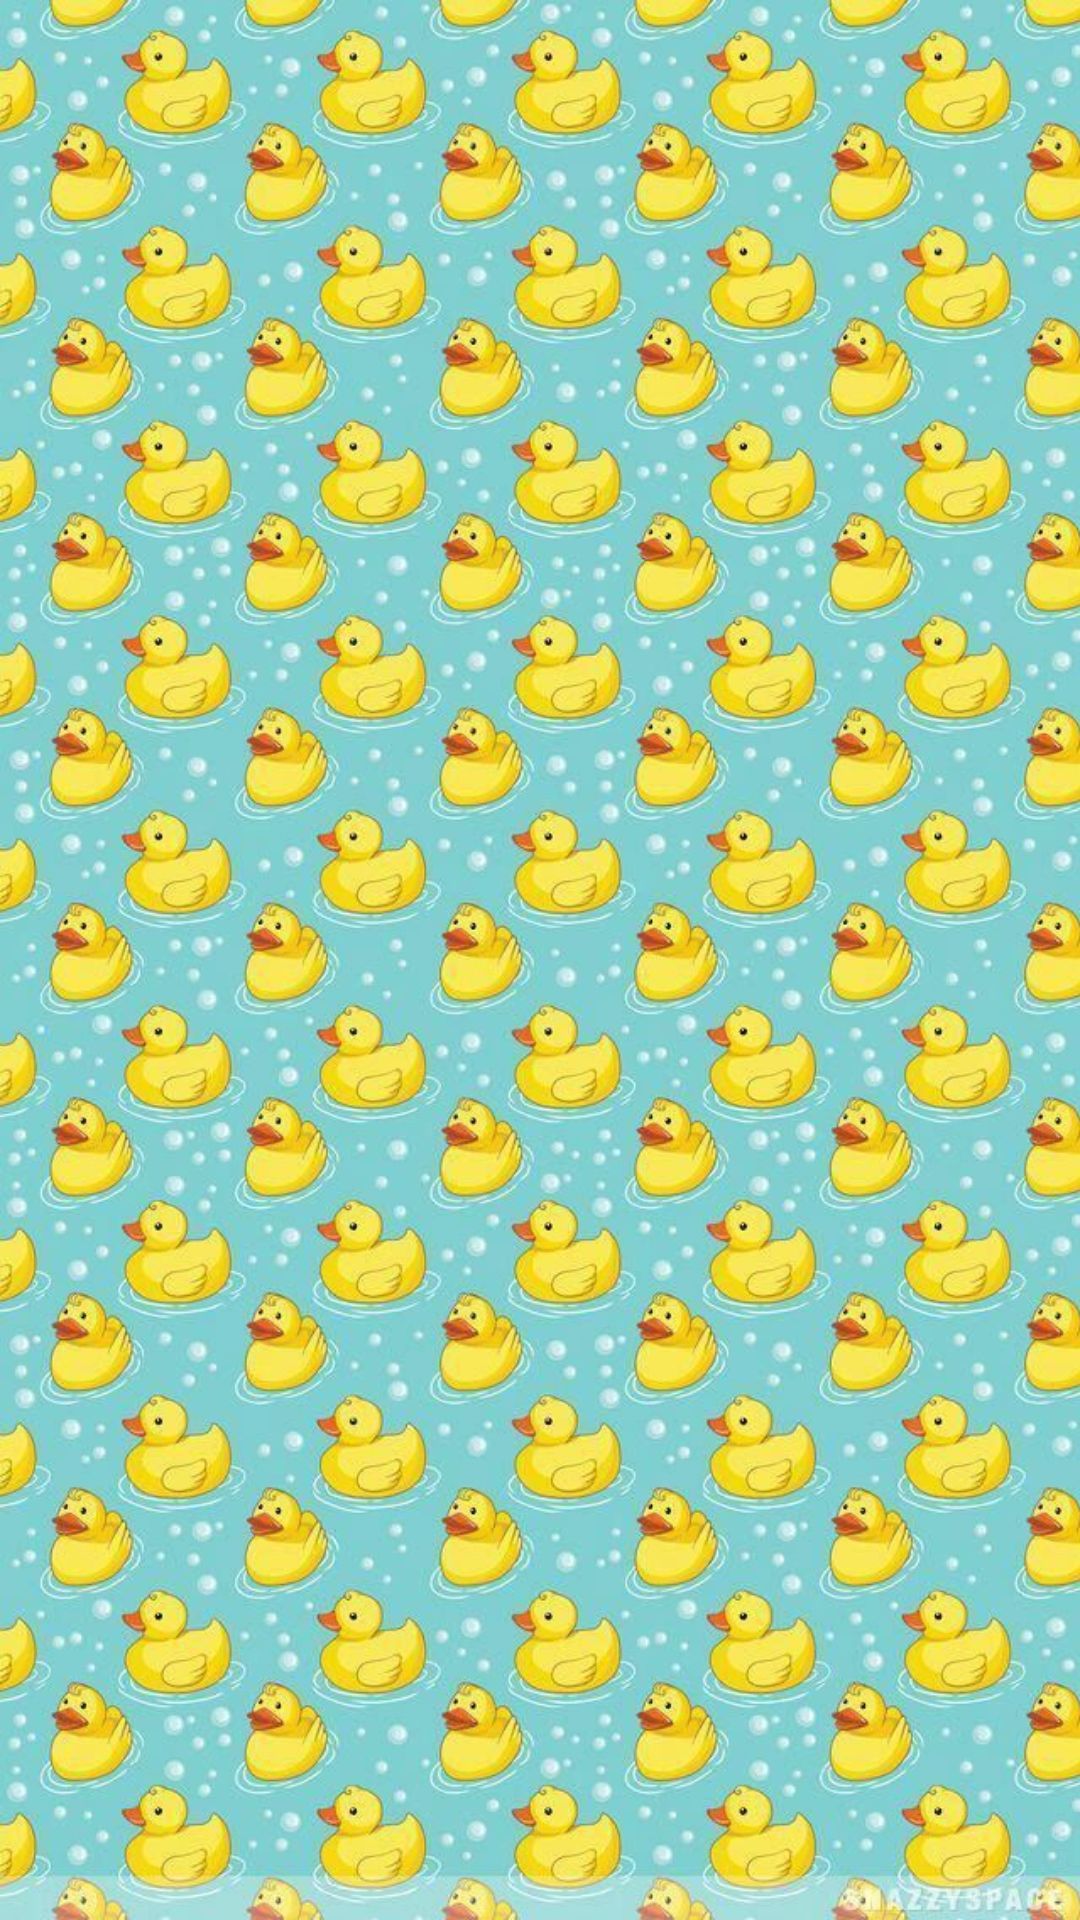 IPhone wallpaper of rubber ducks on a blue background - Duck